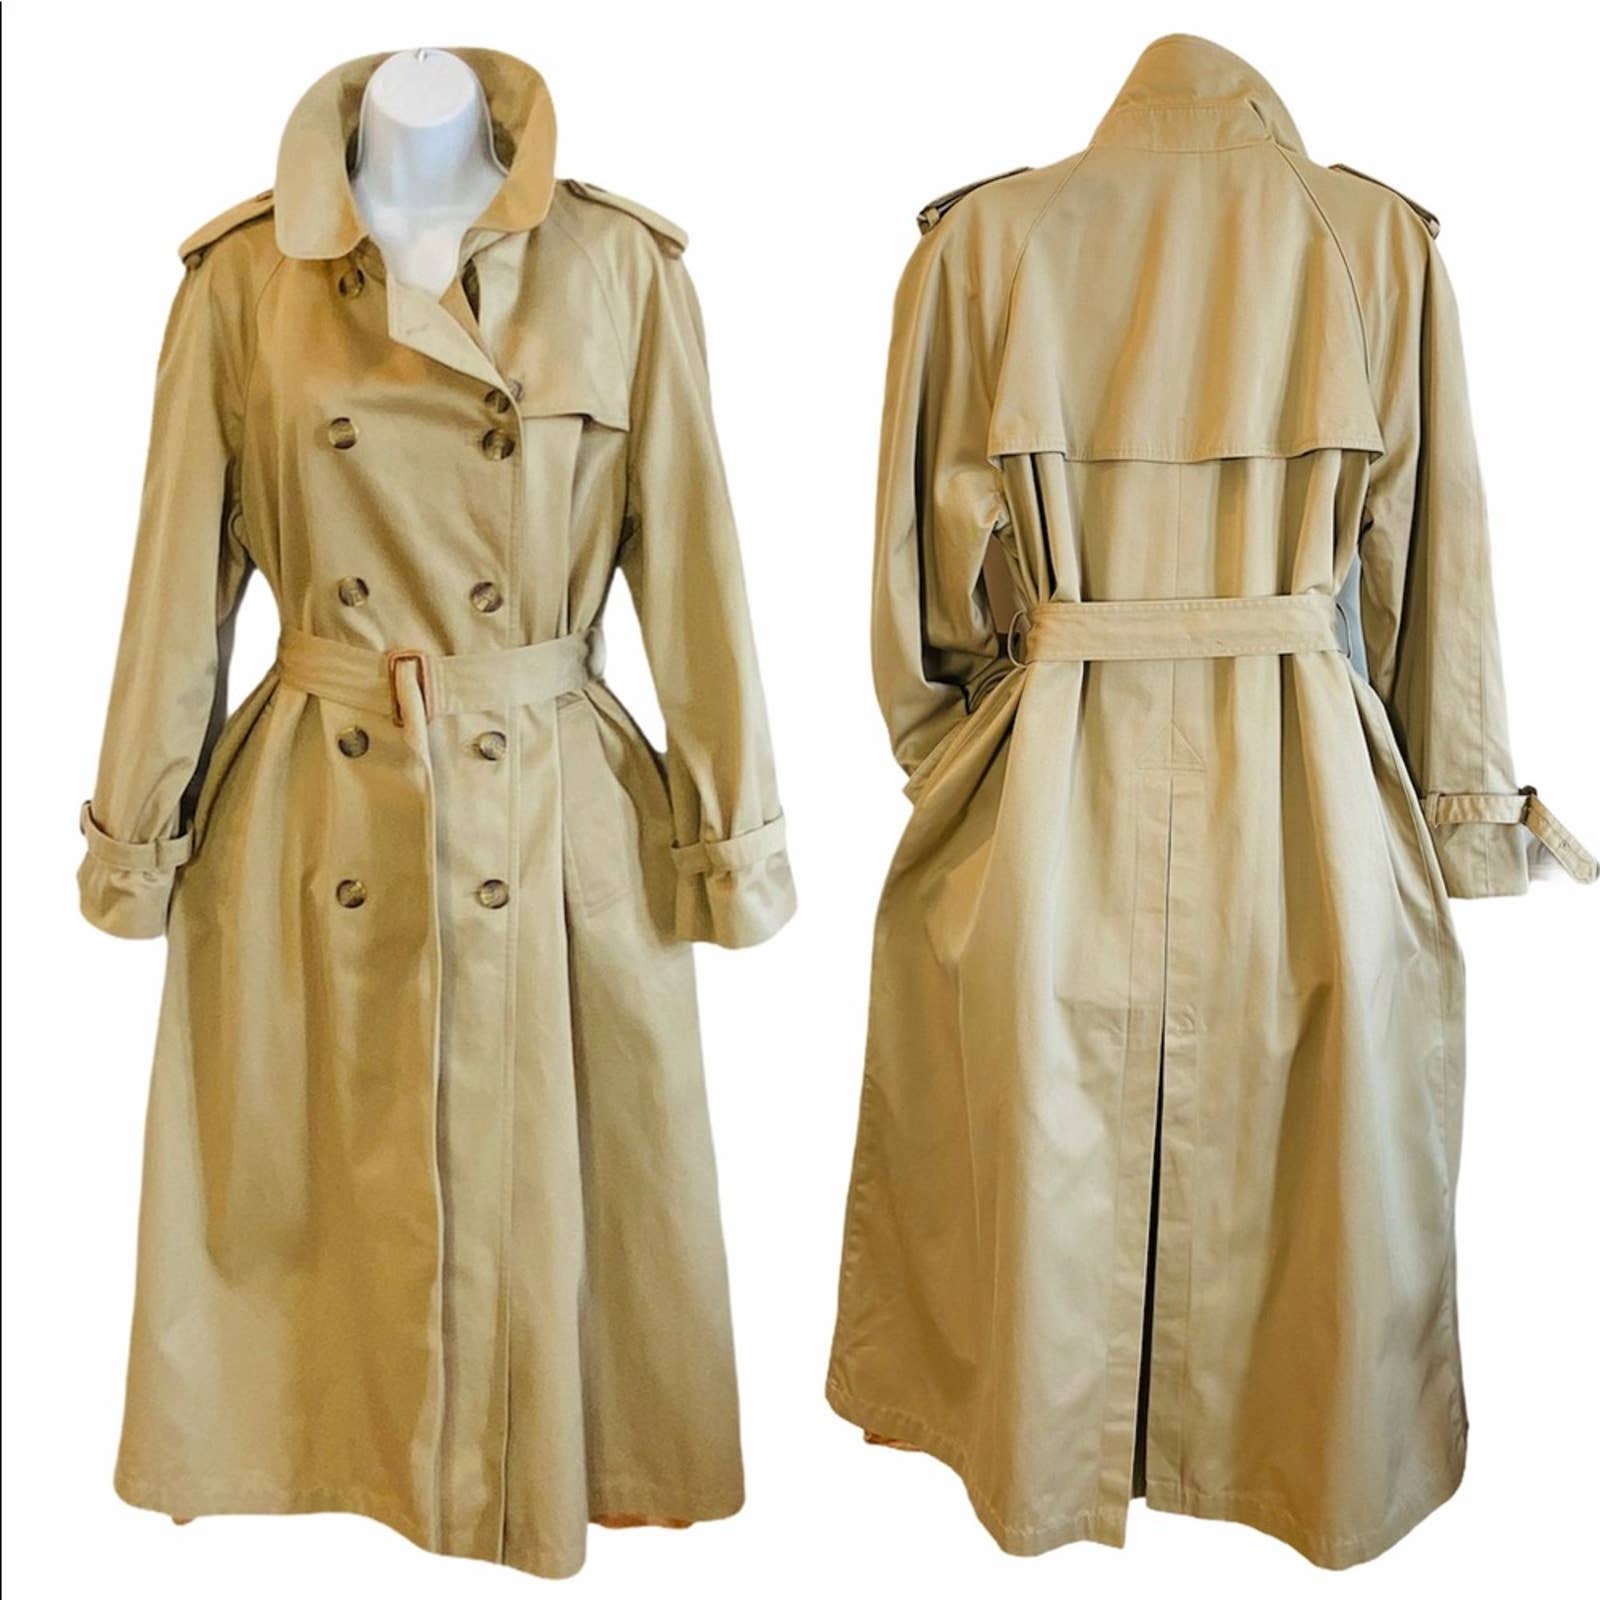 Vintage Tan Belted Trench Coat by Evan Picone | Shop THRILLING